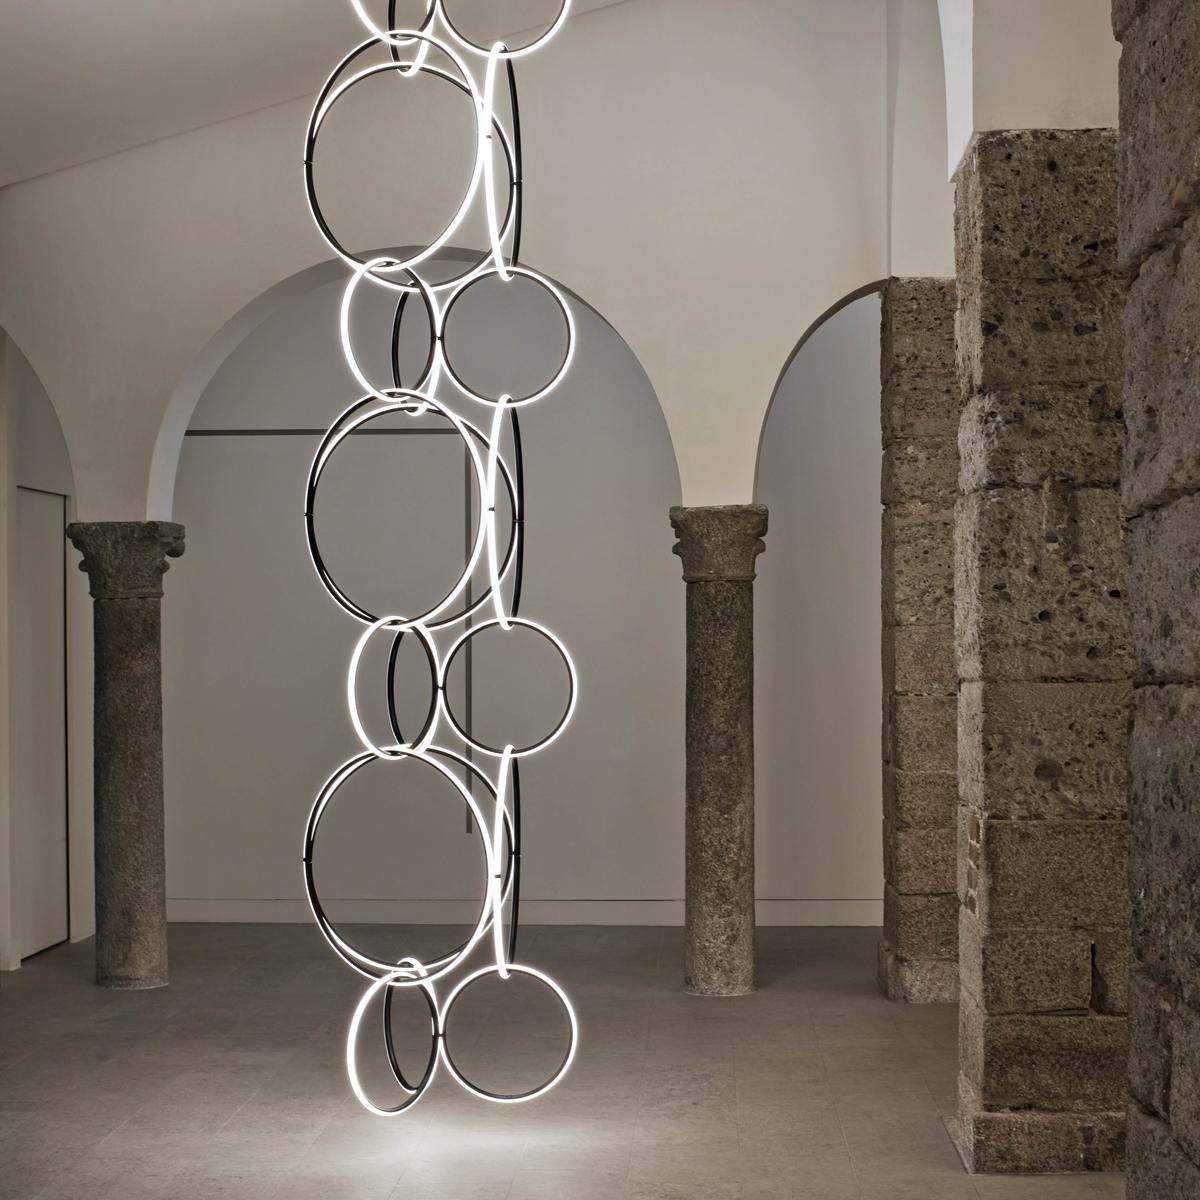 FLOS Square, Circle and Broken Line Arrangements Light by Michael Anastassiades For Sale 2